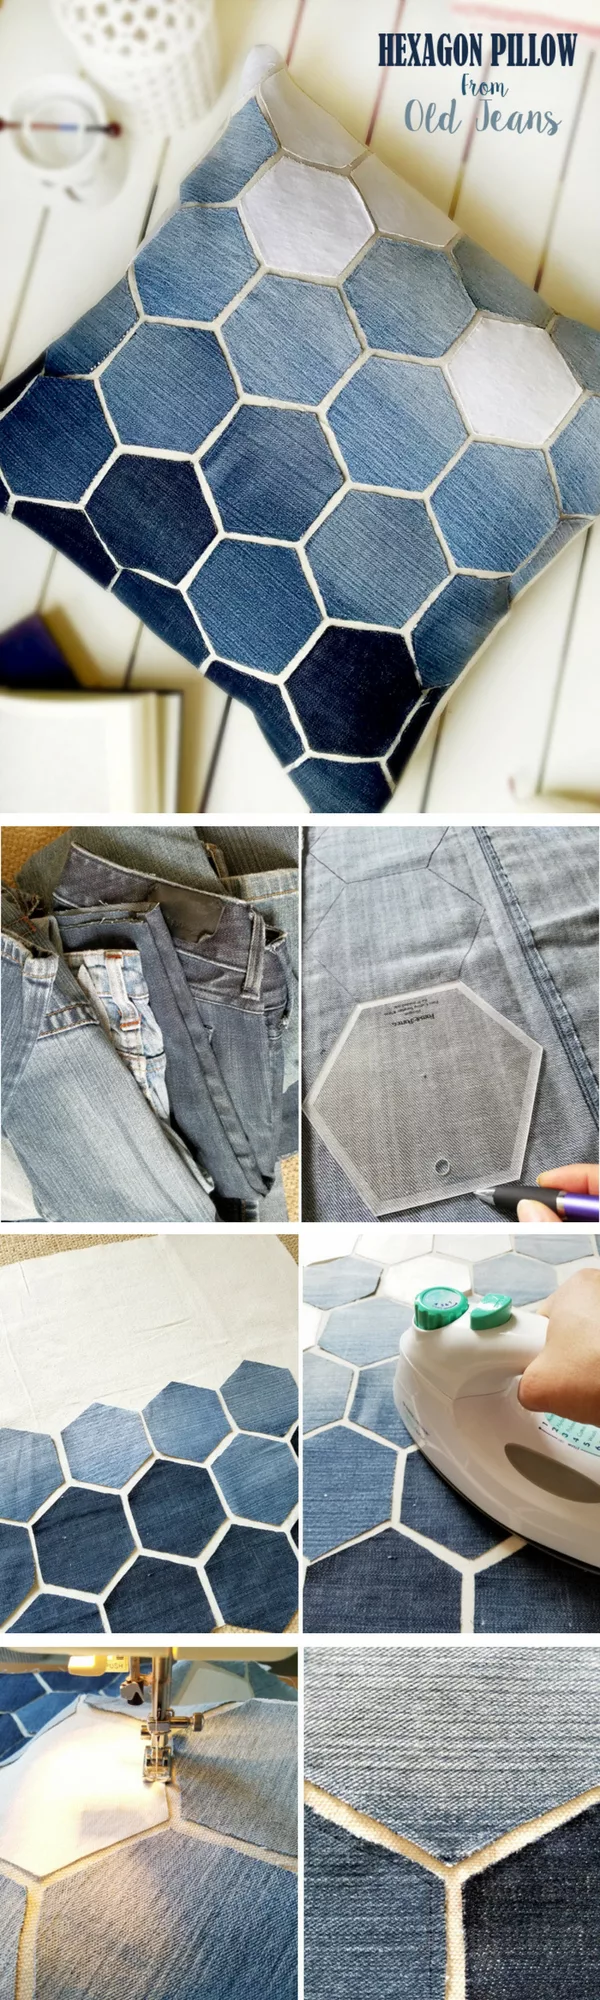 Check out how to make a DIY decorative hexagon pillow form old jeans 